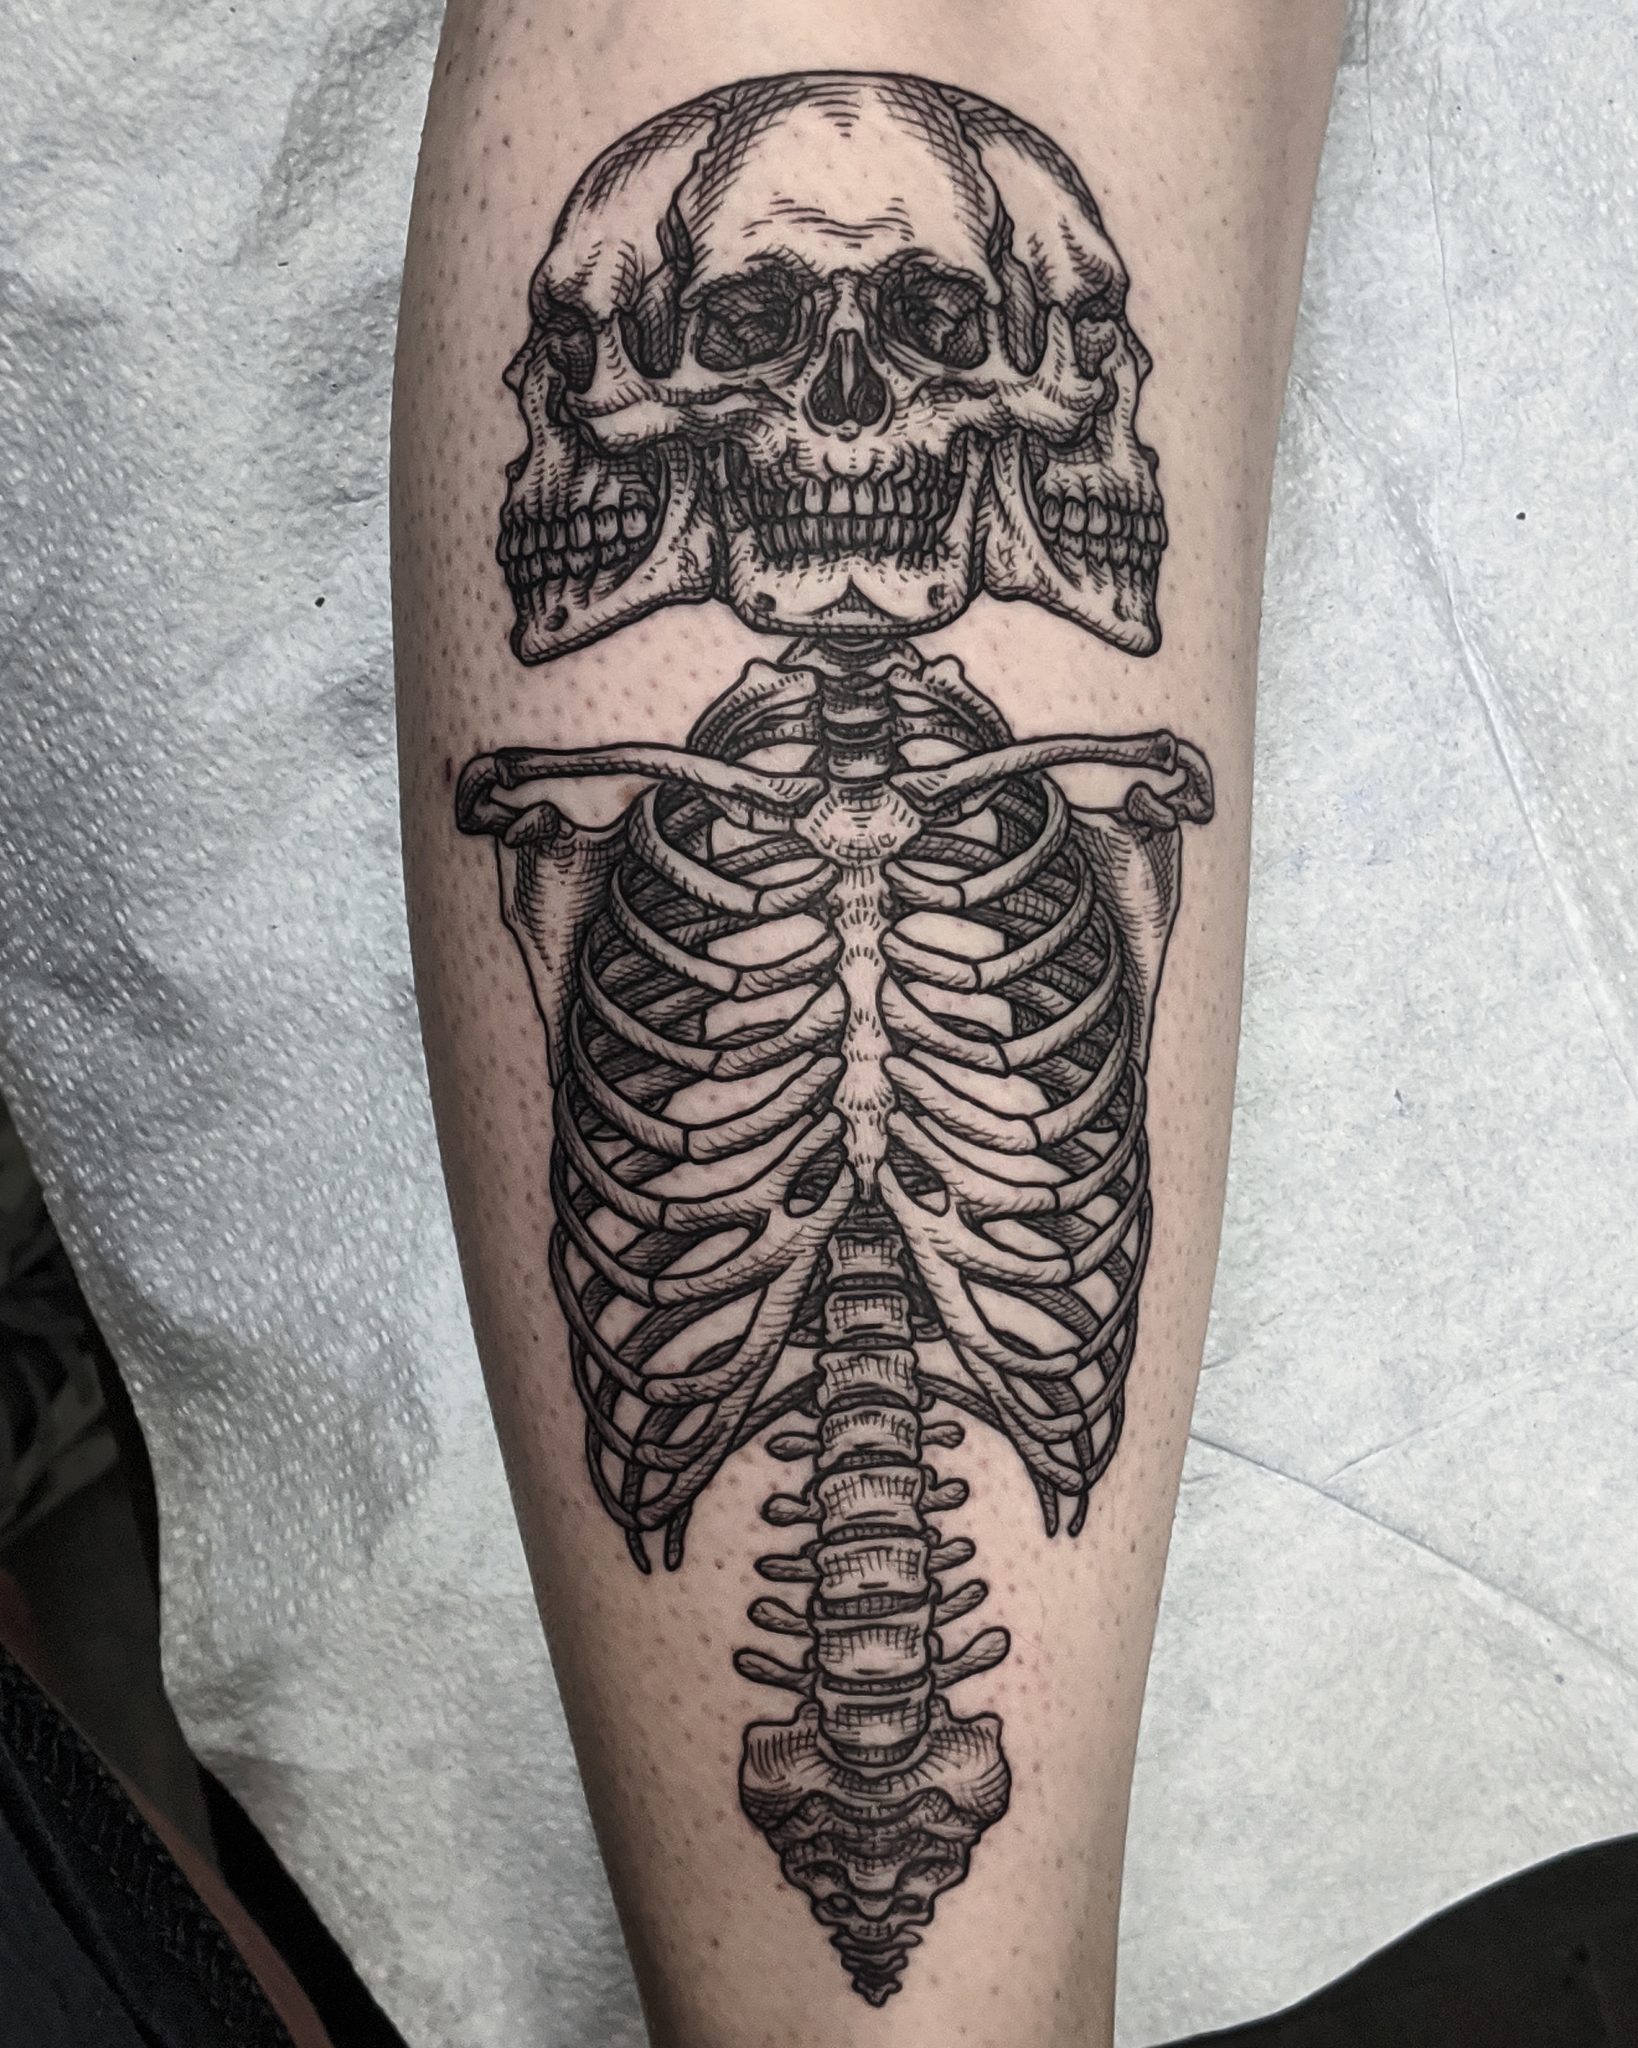 Monolith Tattoo Studio - This amazing skeleton hand tattoo was done by the  one and only @tattoosbyheathervenable! Heather would love to do more pieces  like this one so give our studio a